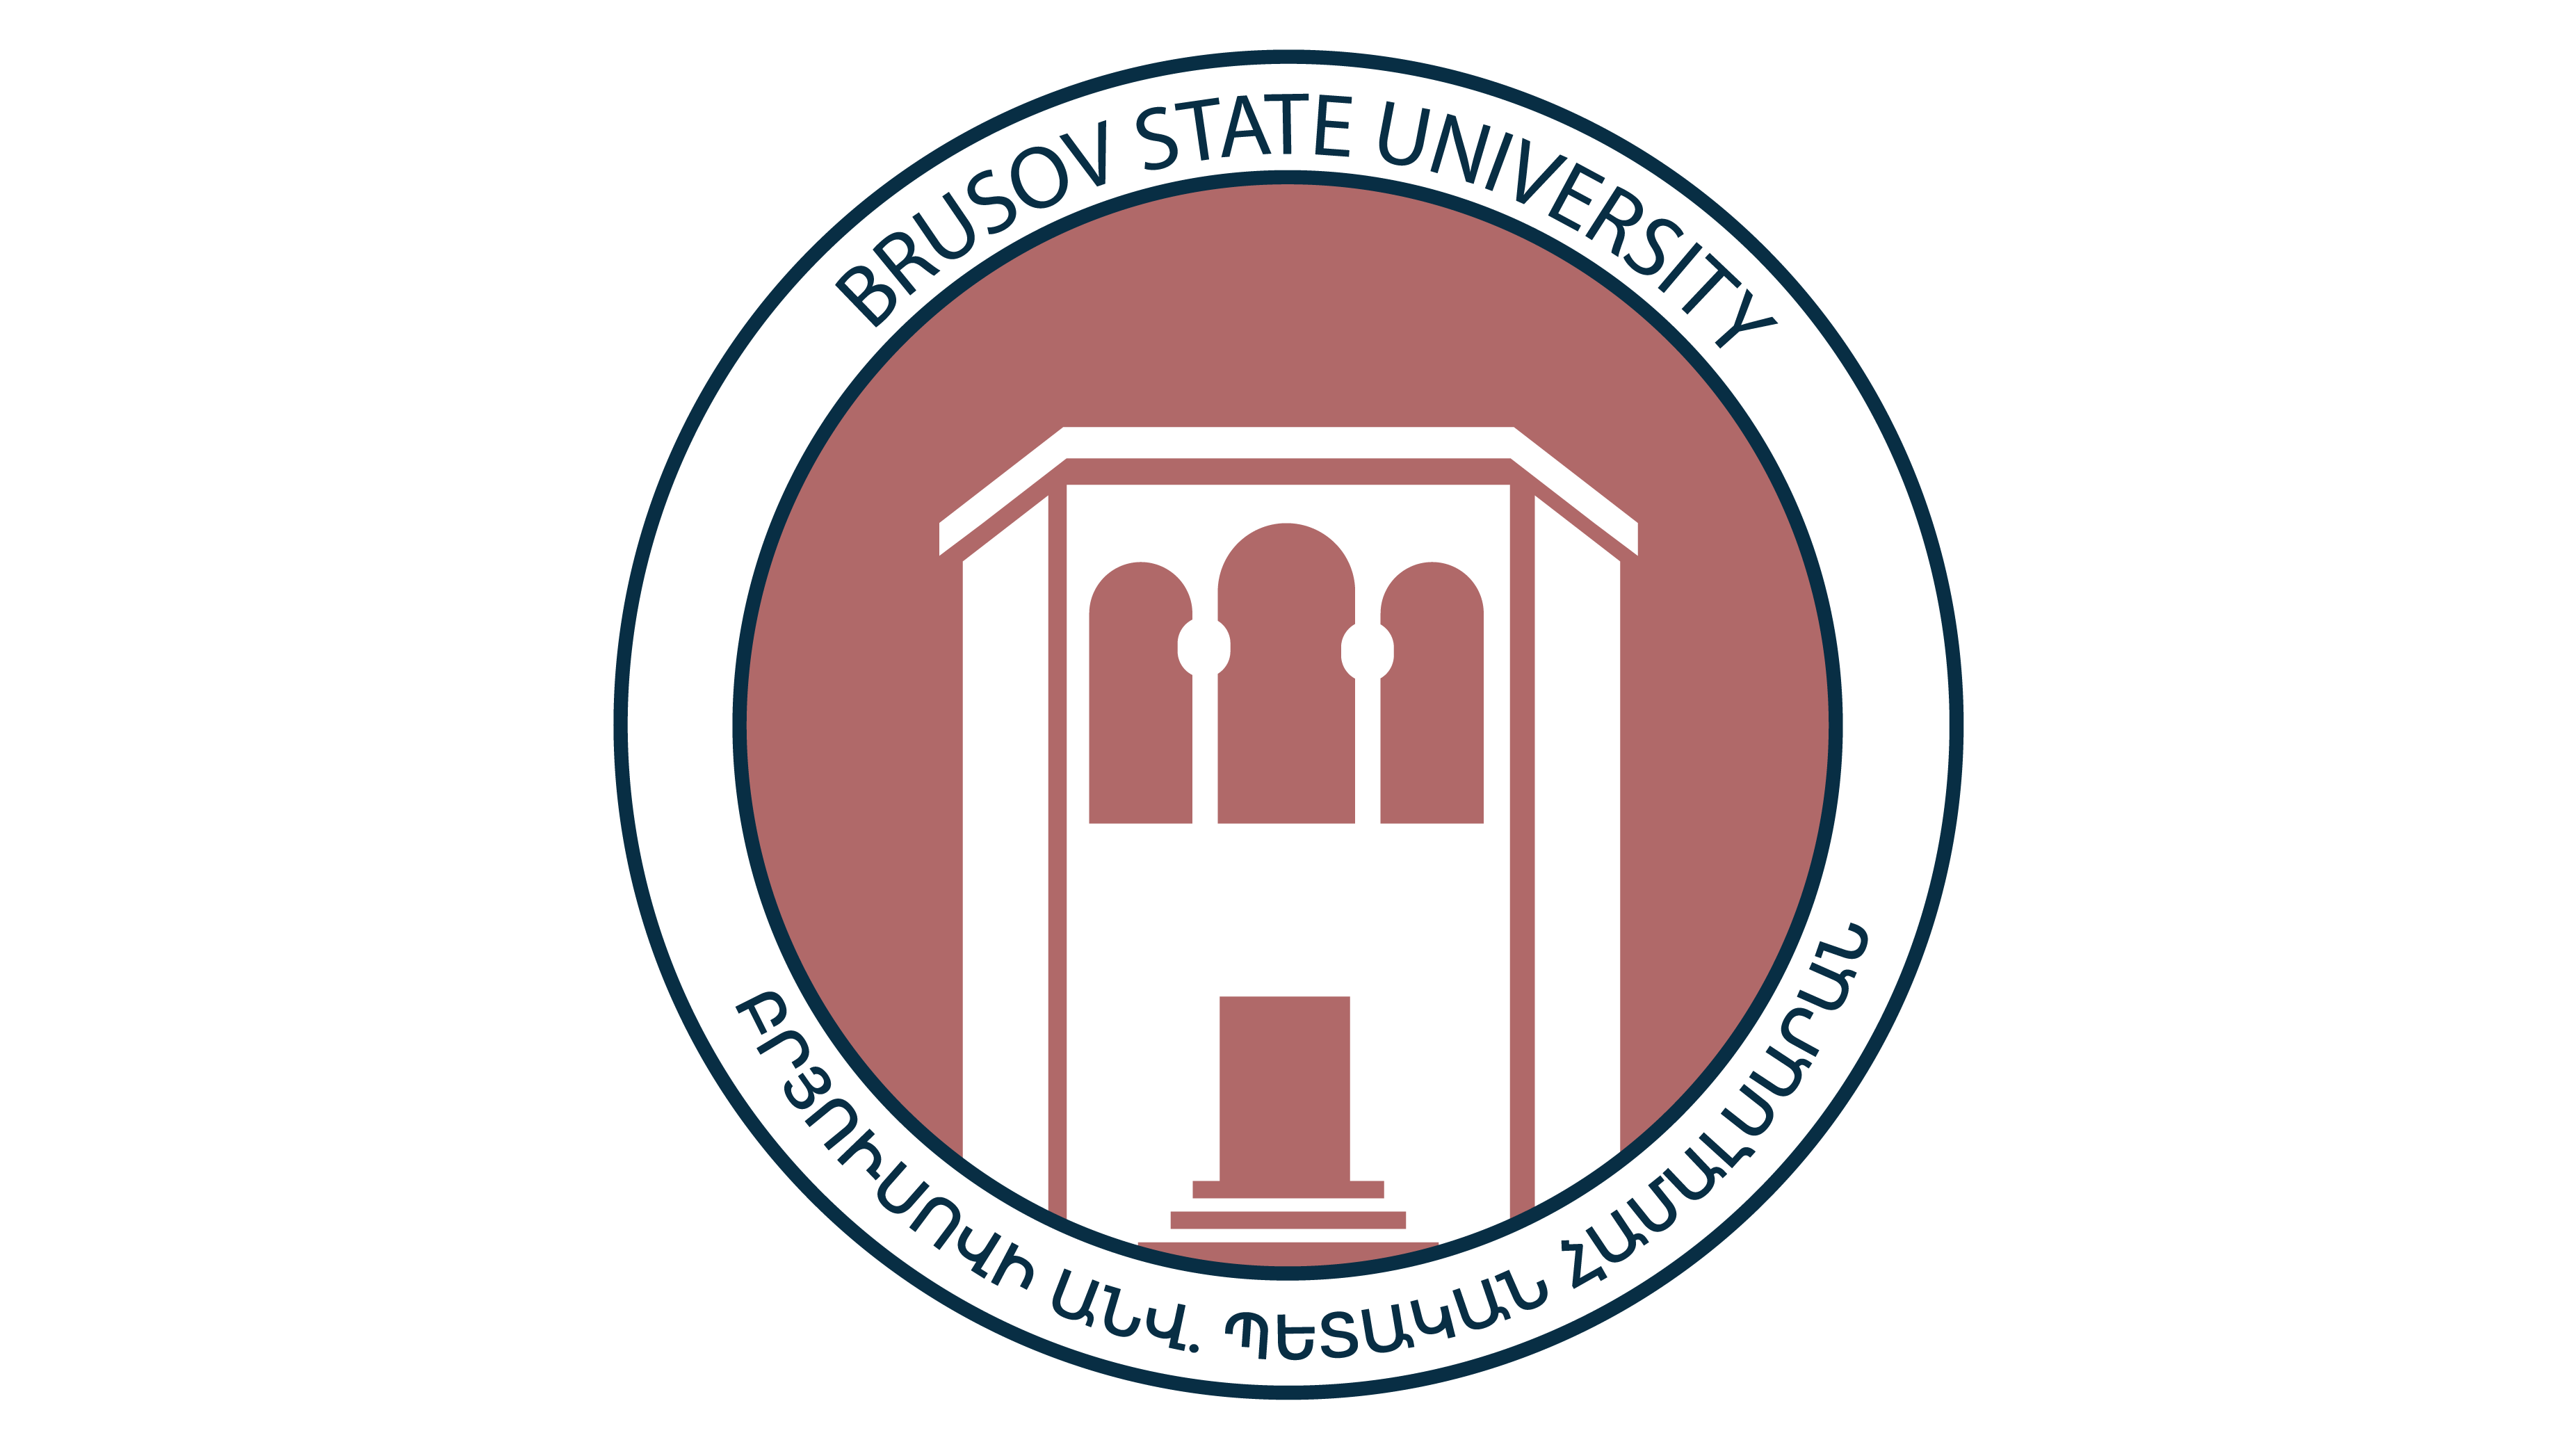 4280-bsulogo16x9.png